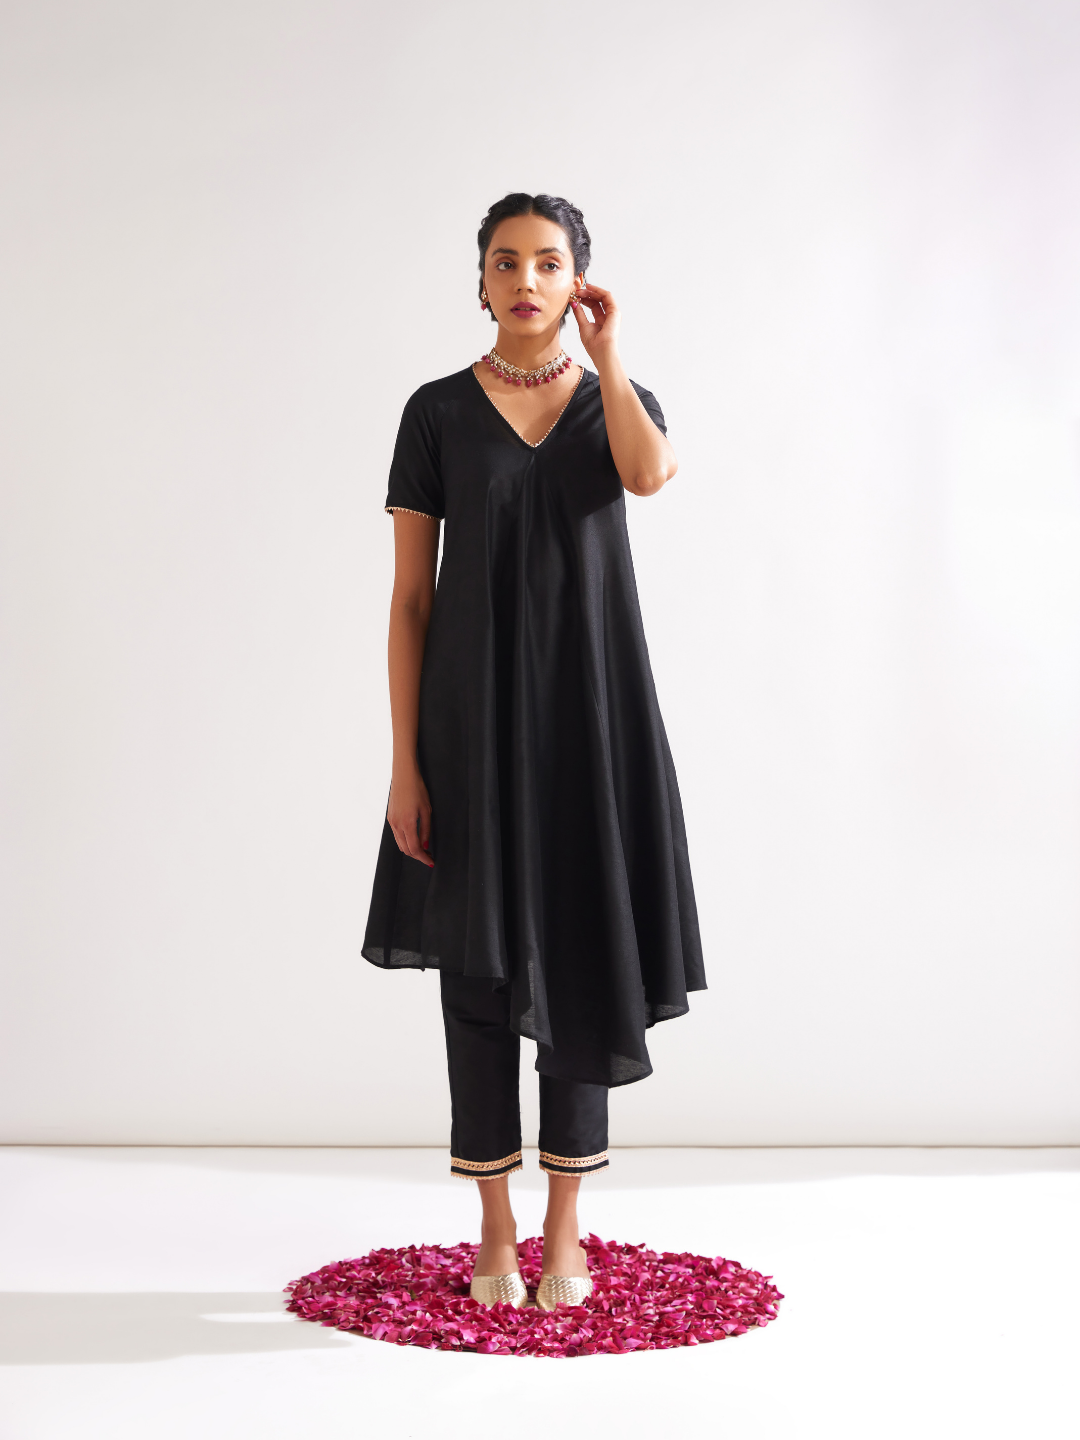 Gulmohar Petal kurta highlighted with gota patti paired with pegged pants along with dupatta- Rich black